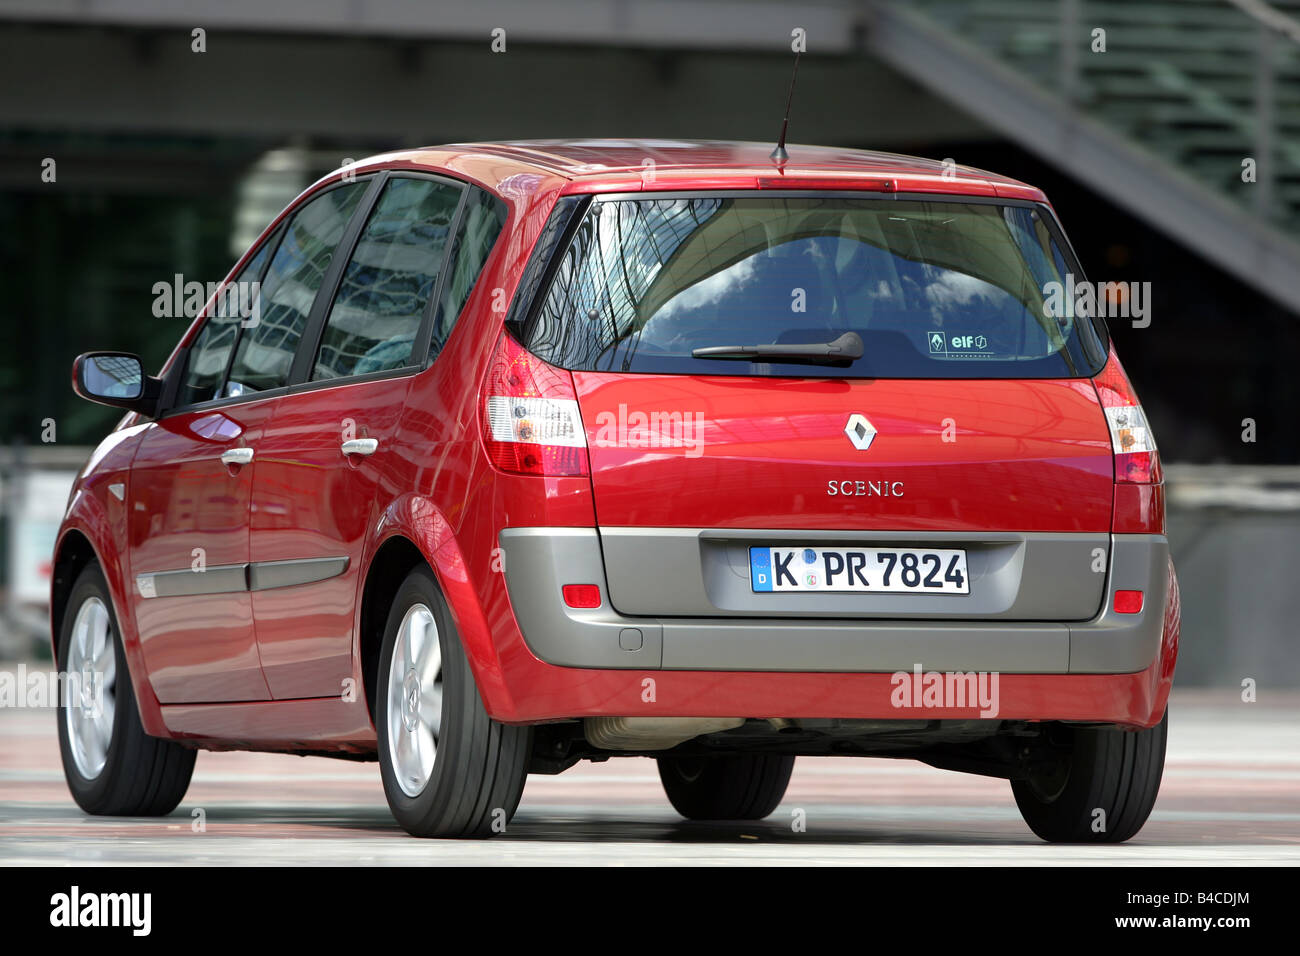 ontwikkeling Niet ingewikkeld rol Car, Renault Scenic 1.0 dCi, model year 2005-, red, Van, standing,  upholding, diagonal from the back, rear view, side view, City Stock Photo -  Alamy